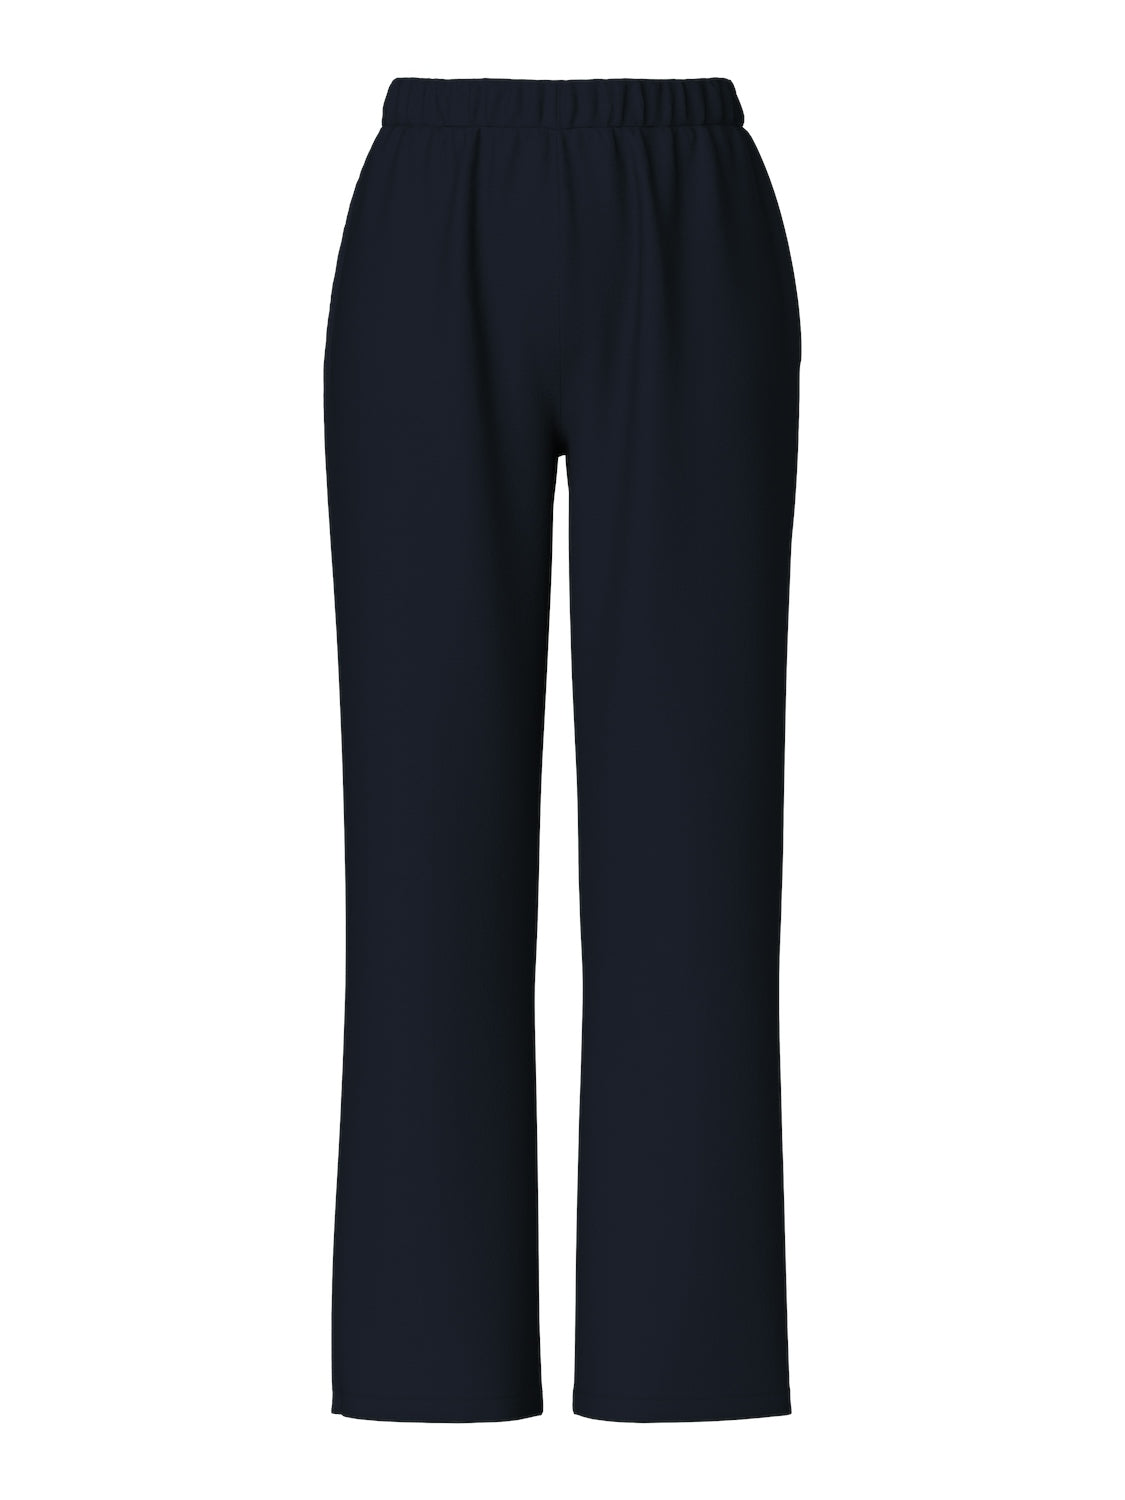 Pieces Chilli Summer Wide Sweat Pants, Navy